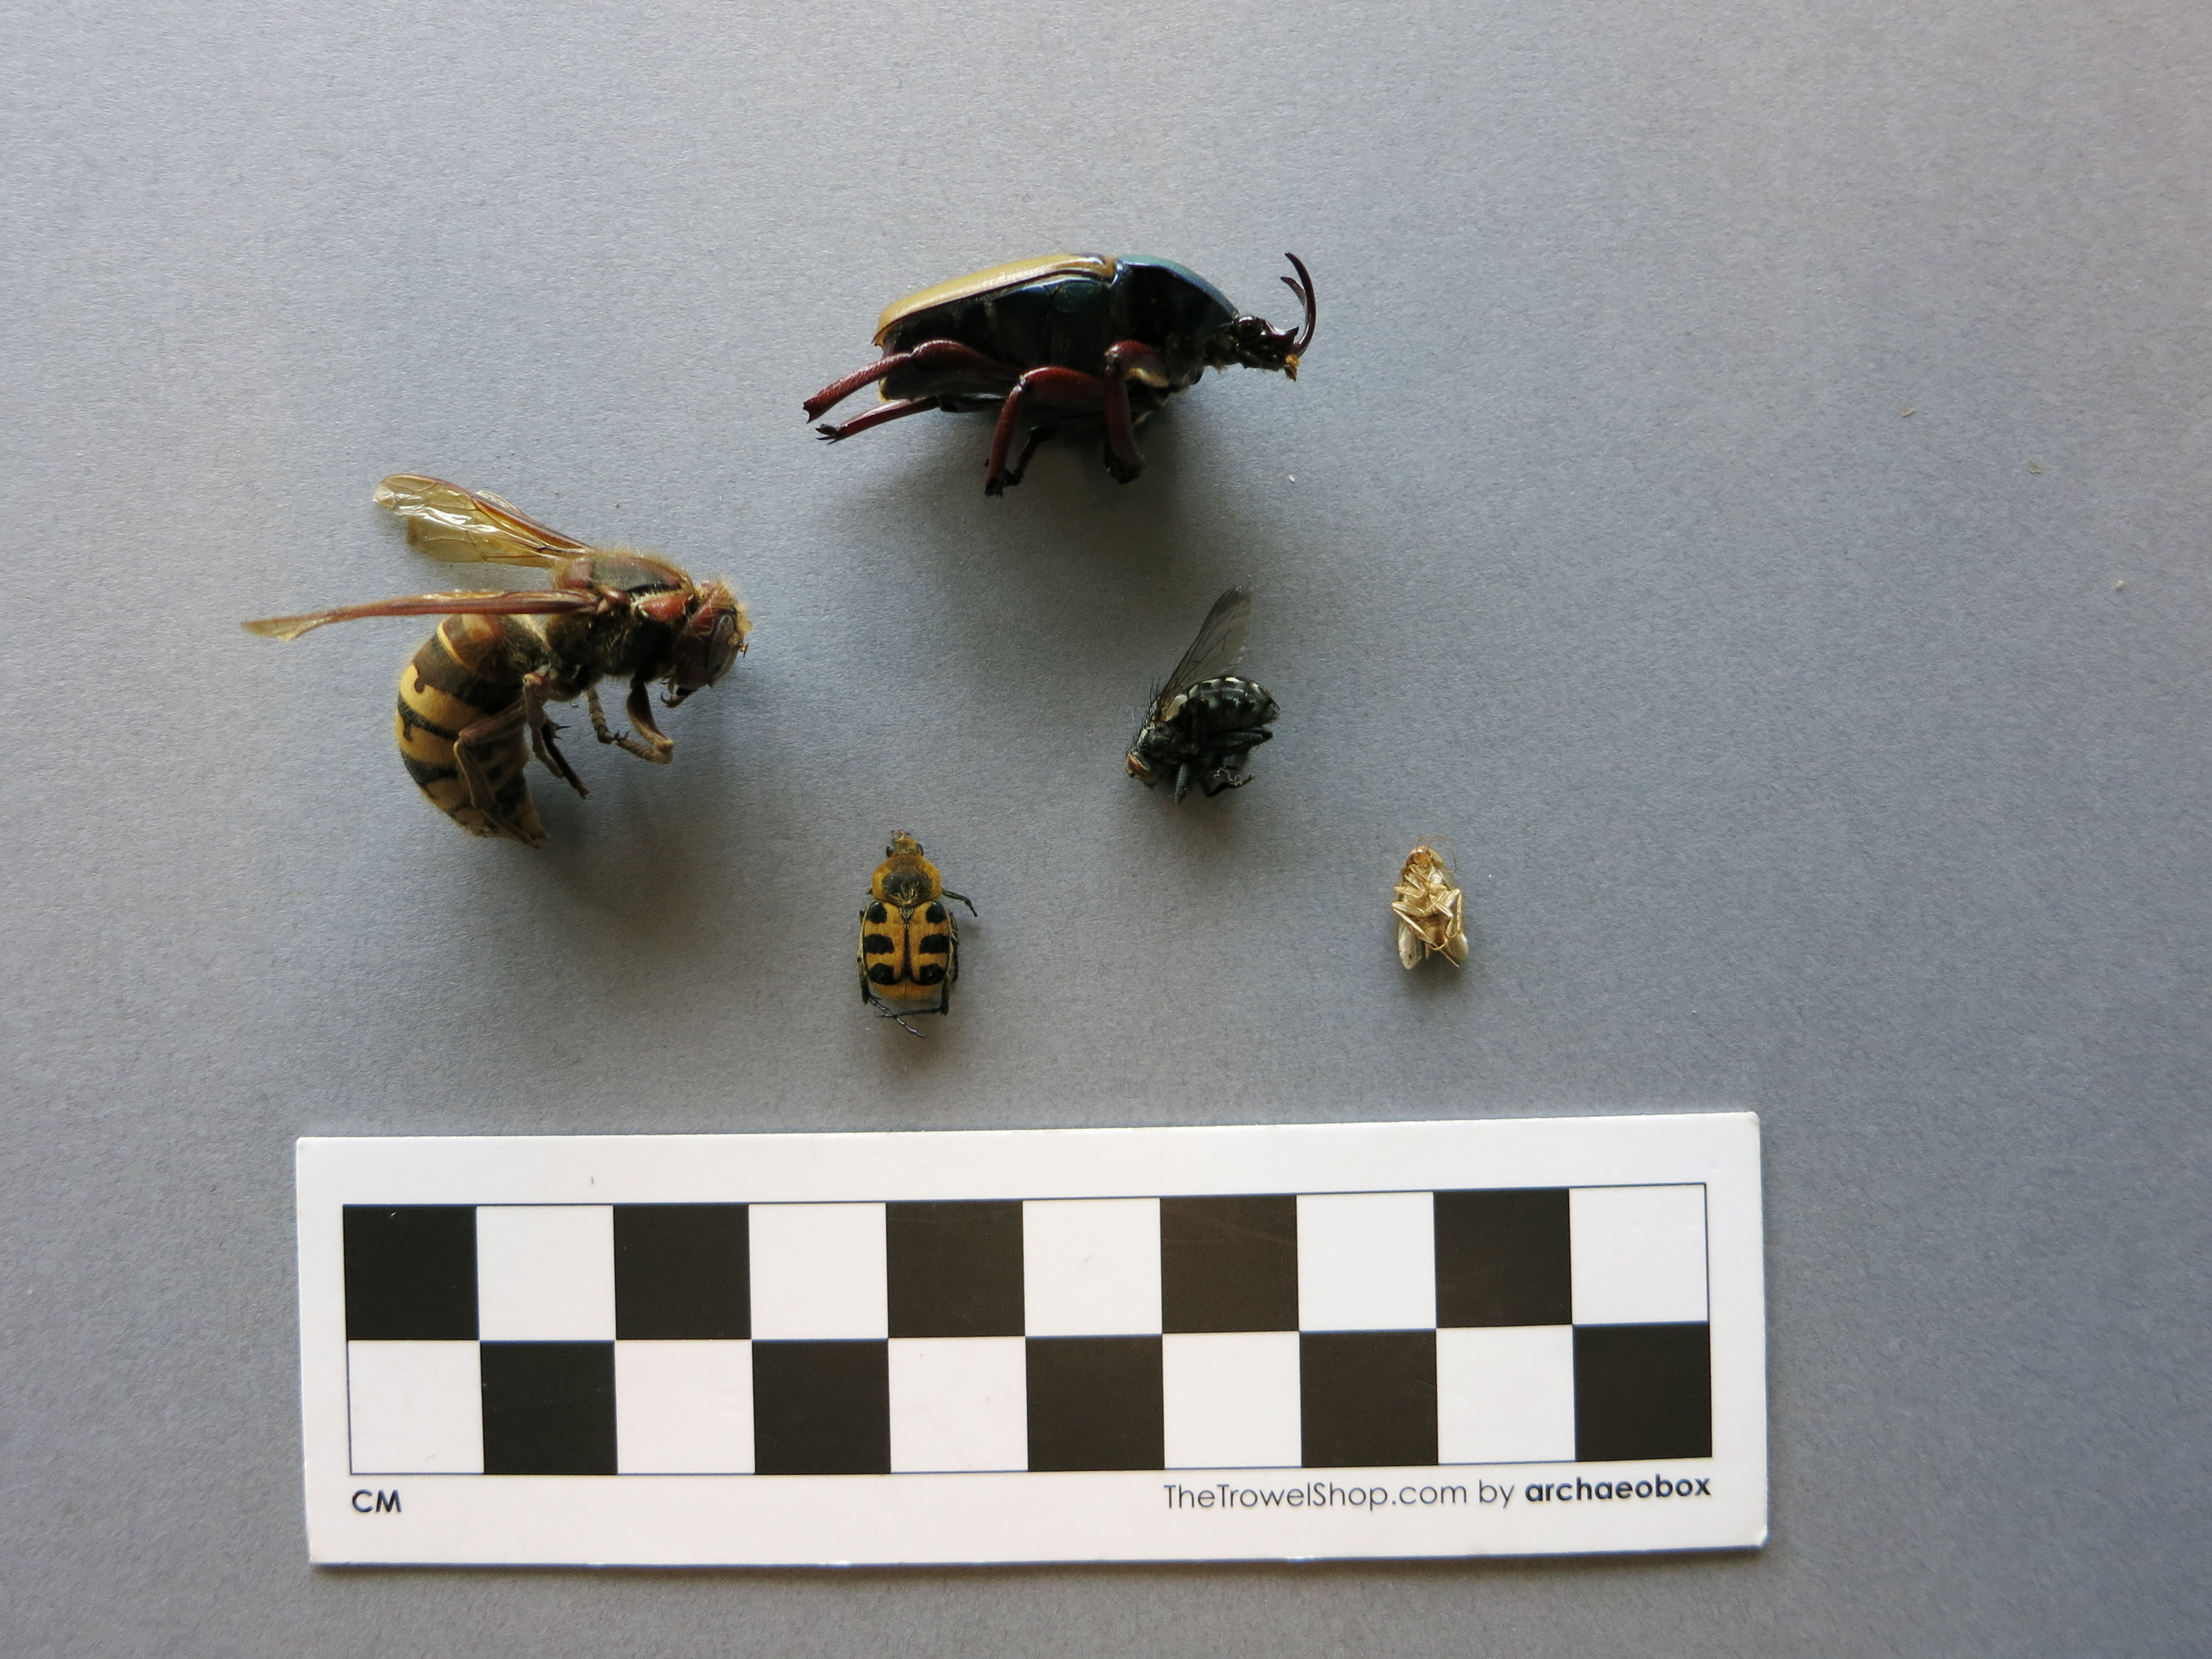 Size Comparison Insects.jpg